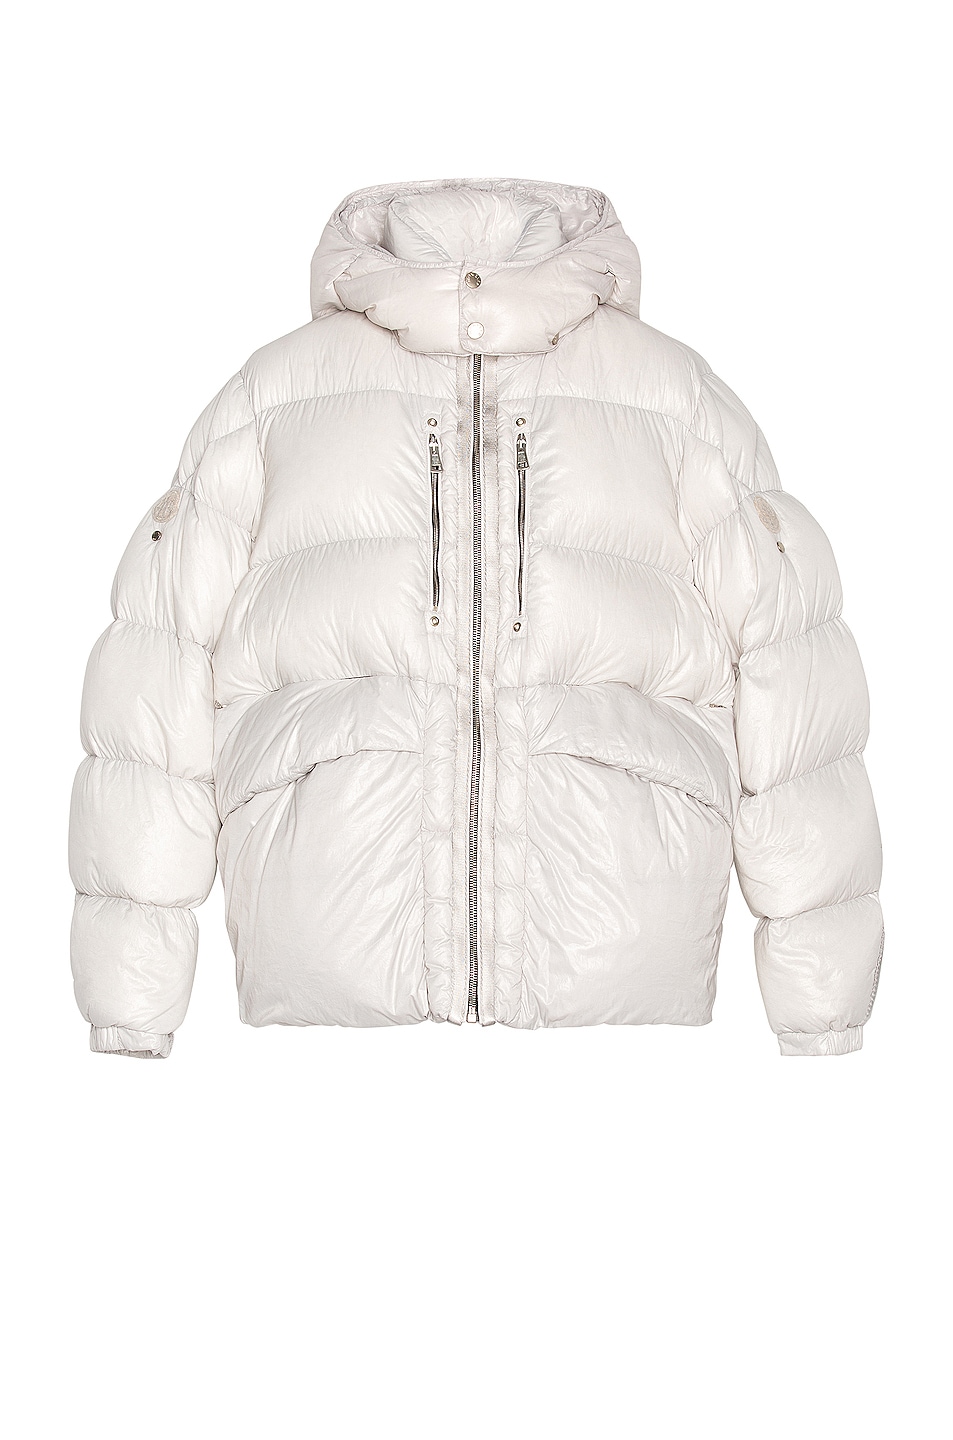 Image 1 of Moncler Genius Moncler Alyx Hooded Forest Jacket in Silver